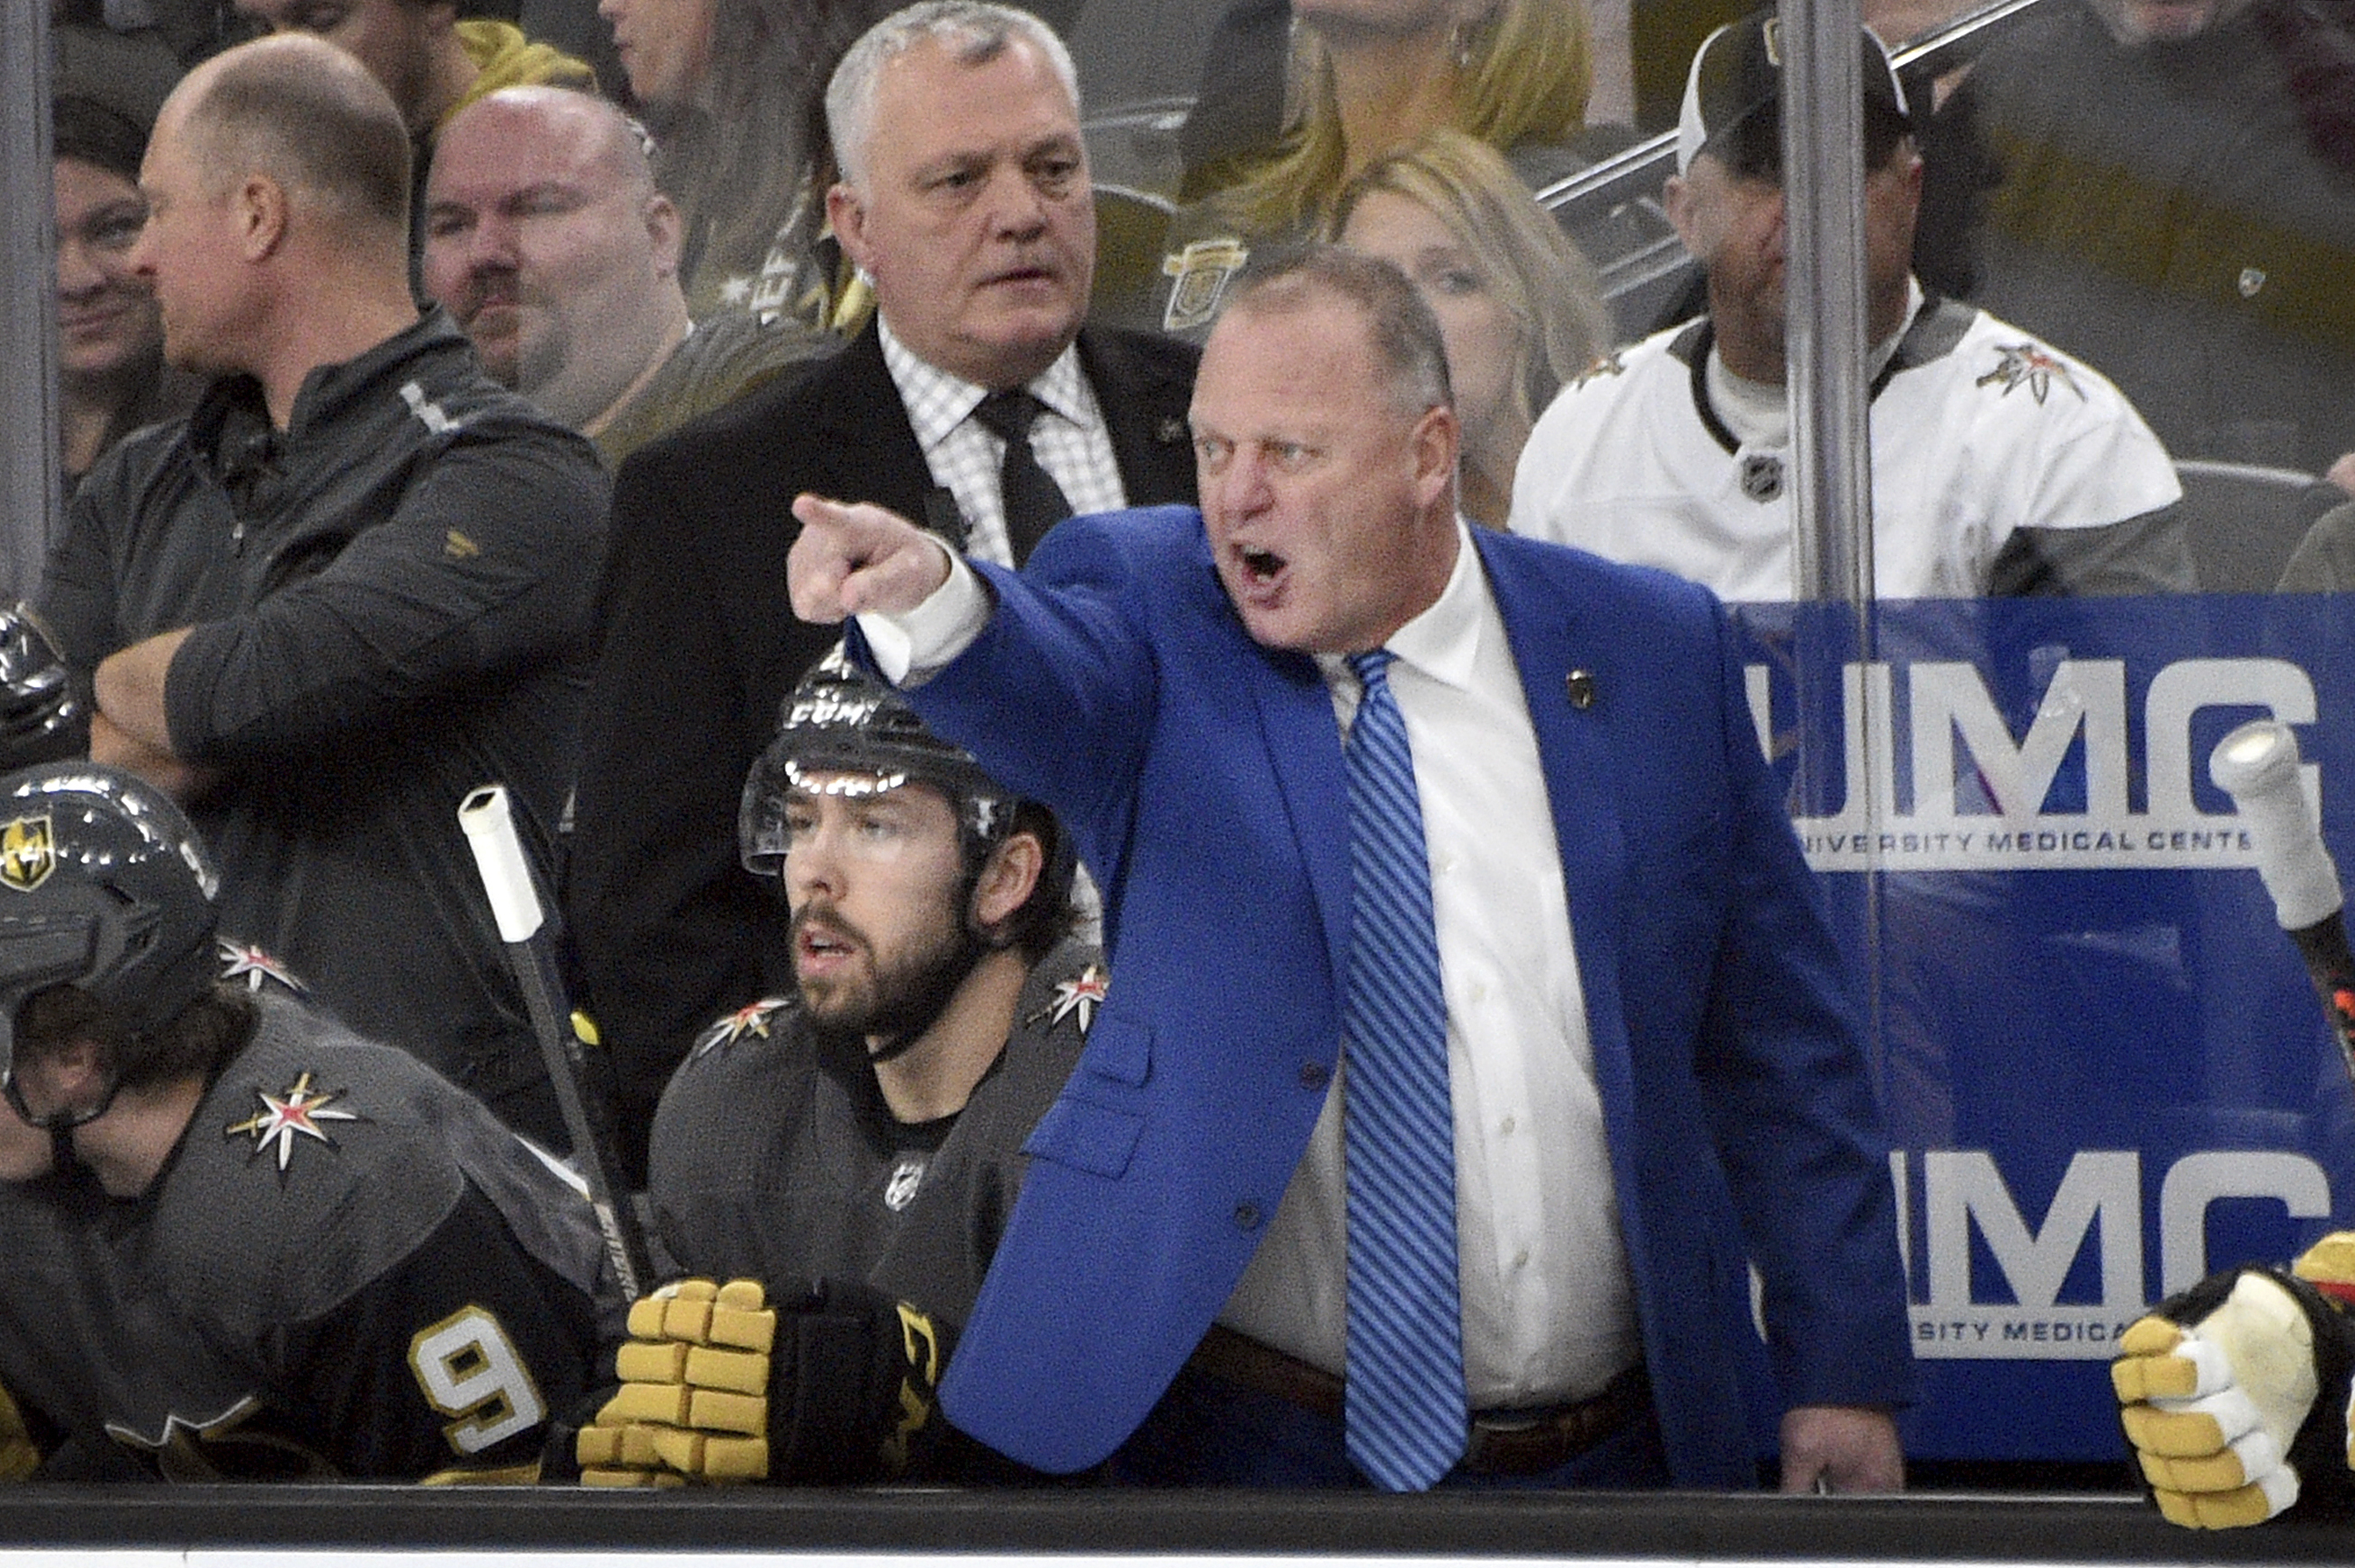 Gerard Gallant's Job in Jeopardy After Altercation with Chris Drury